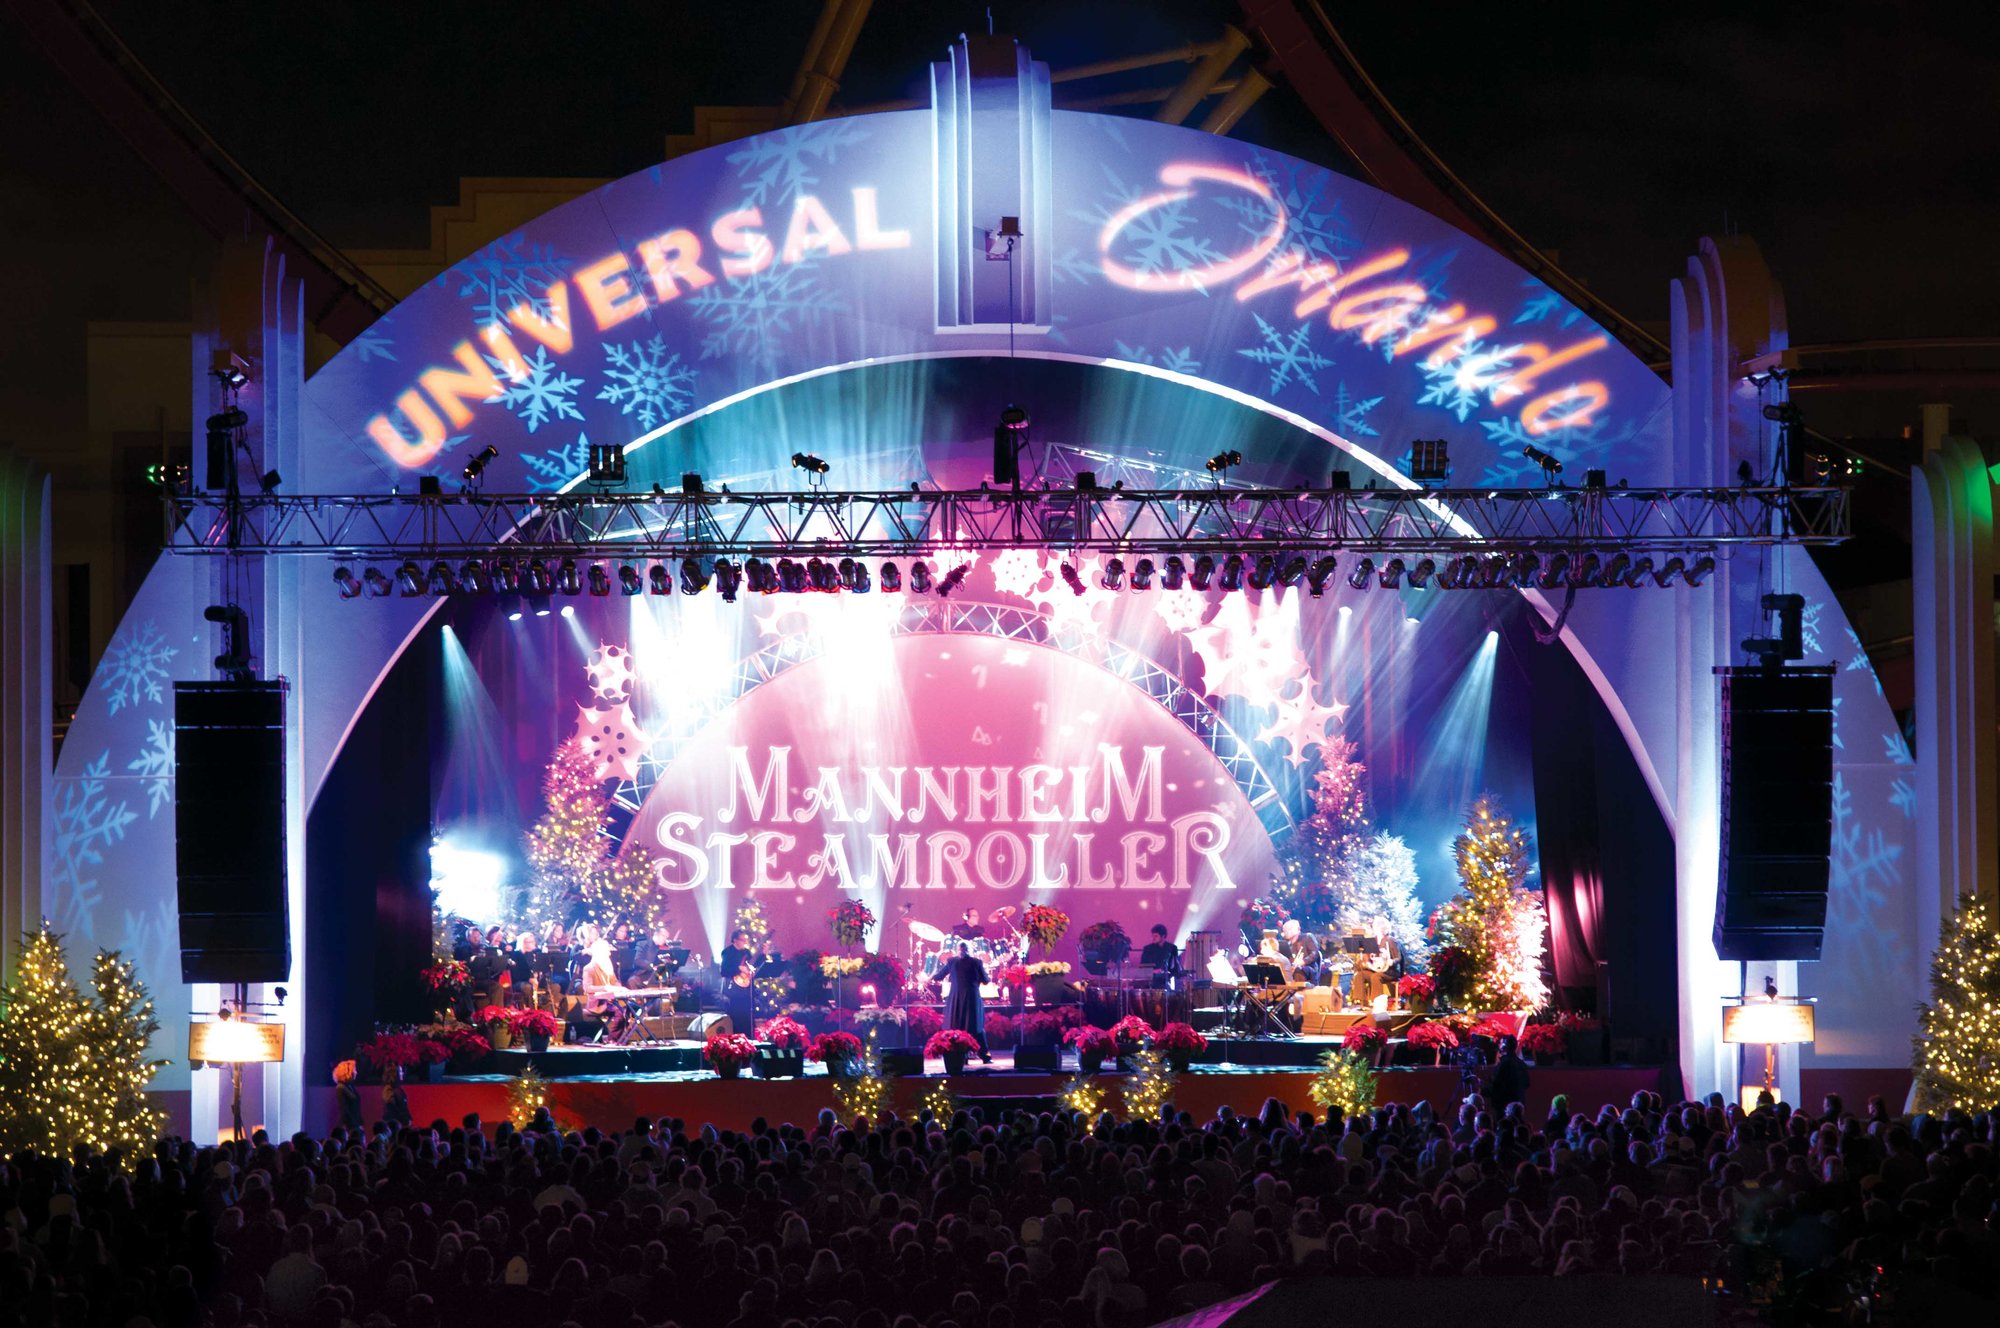 universal orlando stage at night with spotlights and mannheim steamroller playing music